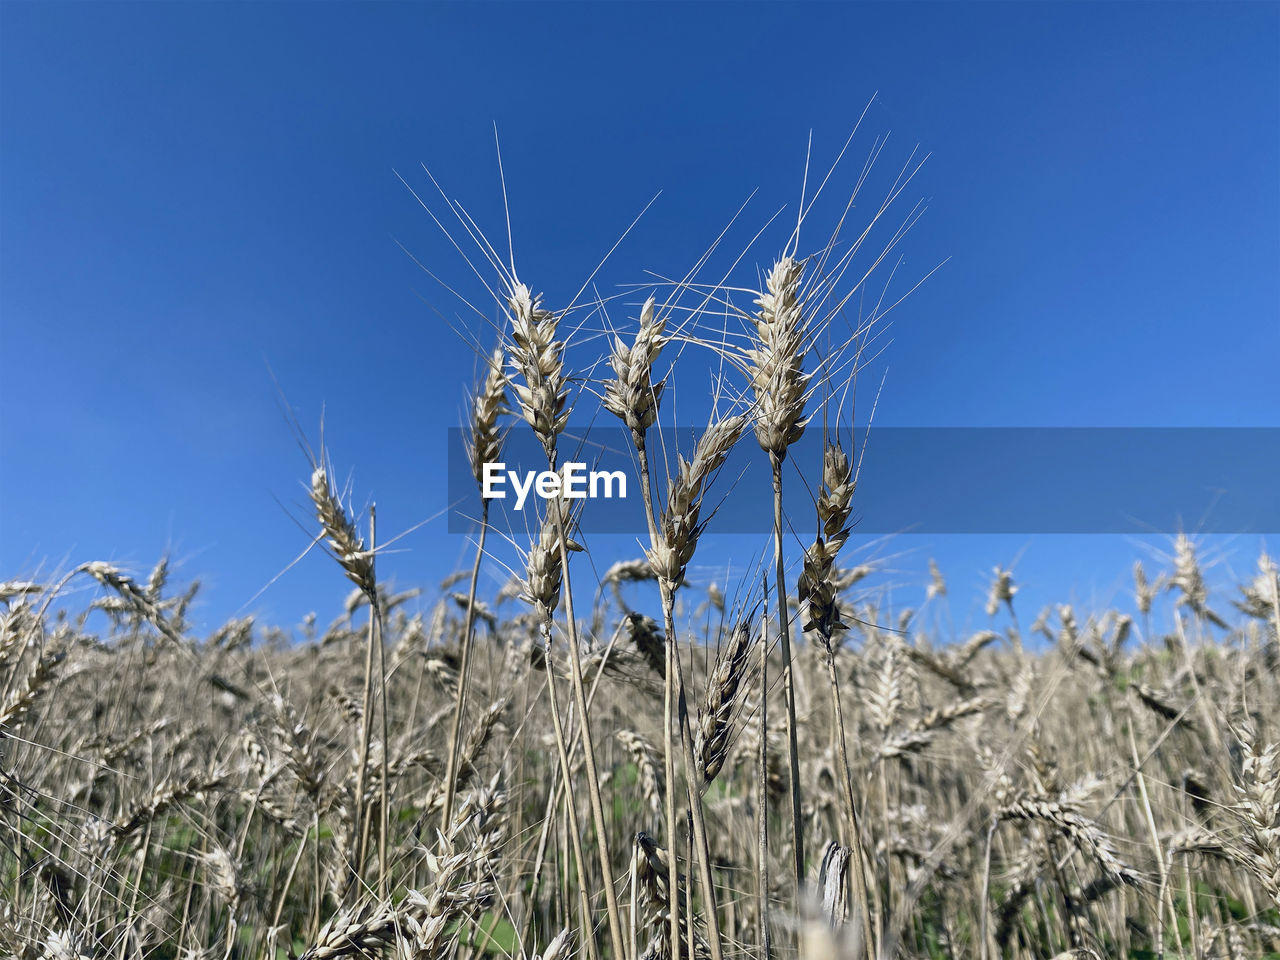 CLOSE-UP OF WHEAT GROWING ON FIELD AGAINST SKY